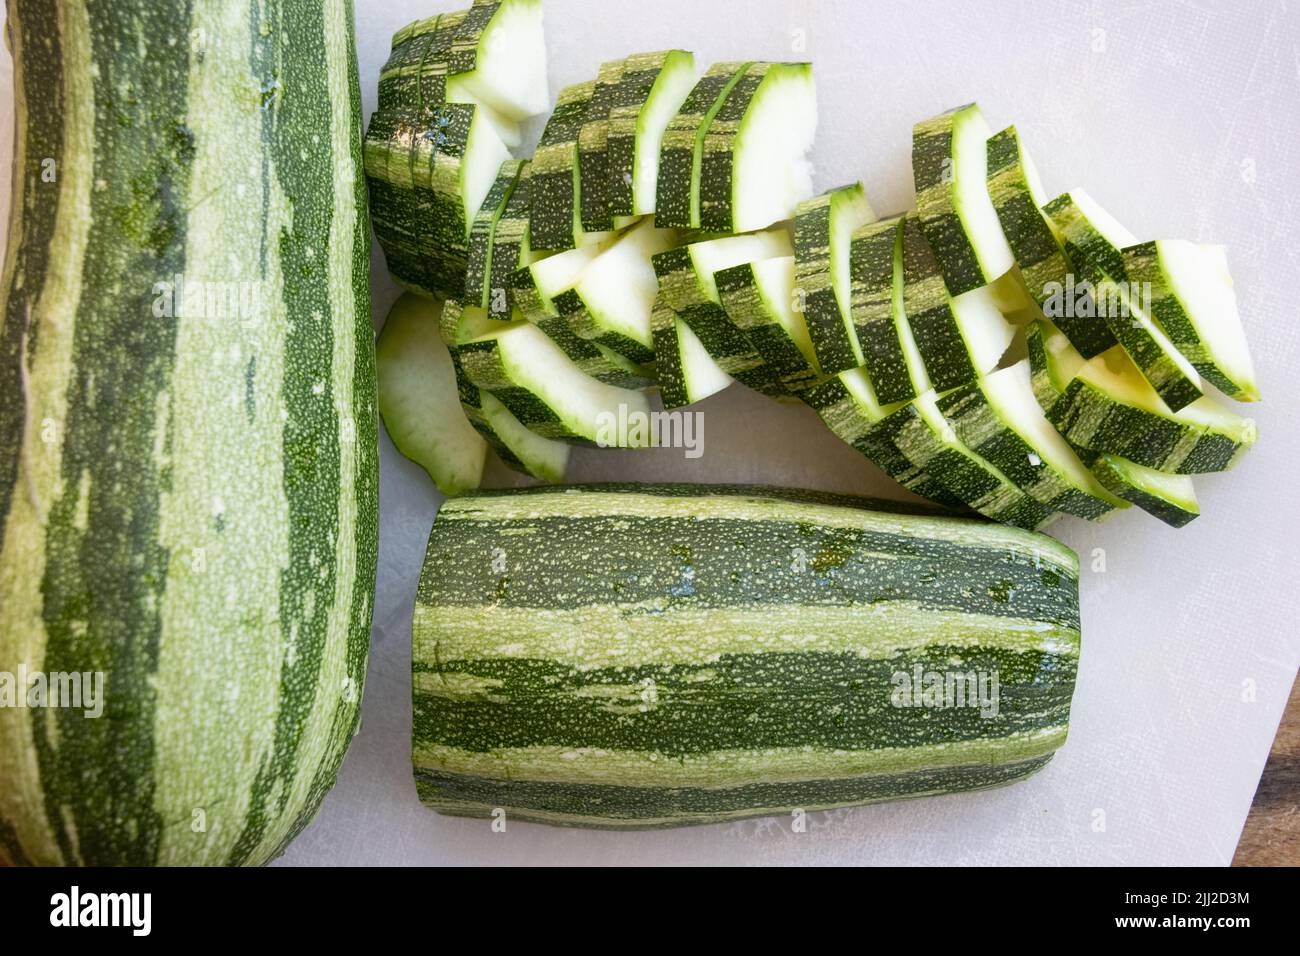 zucchini cut in pieces as ingredient for soup Stock Photo